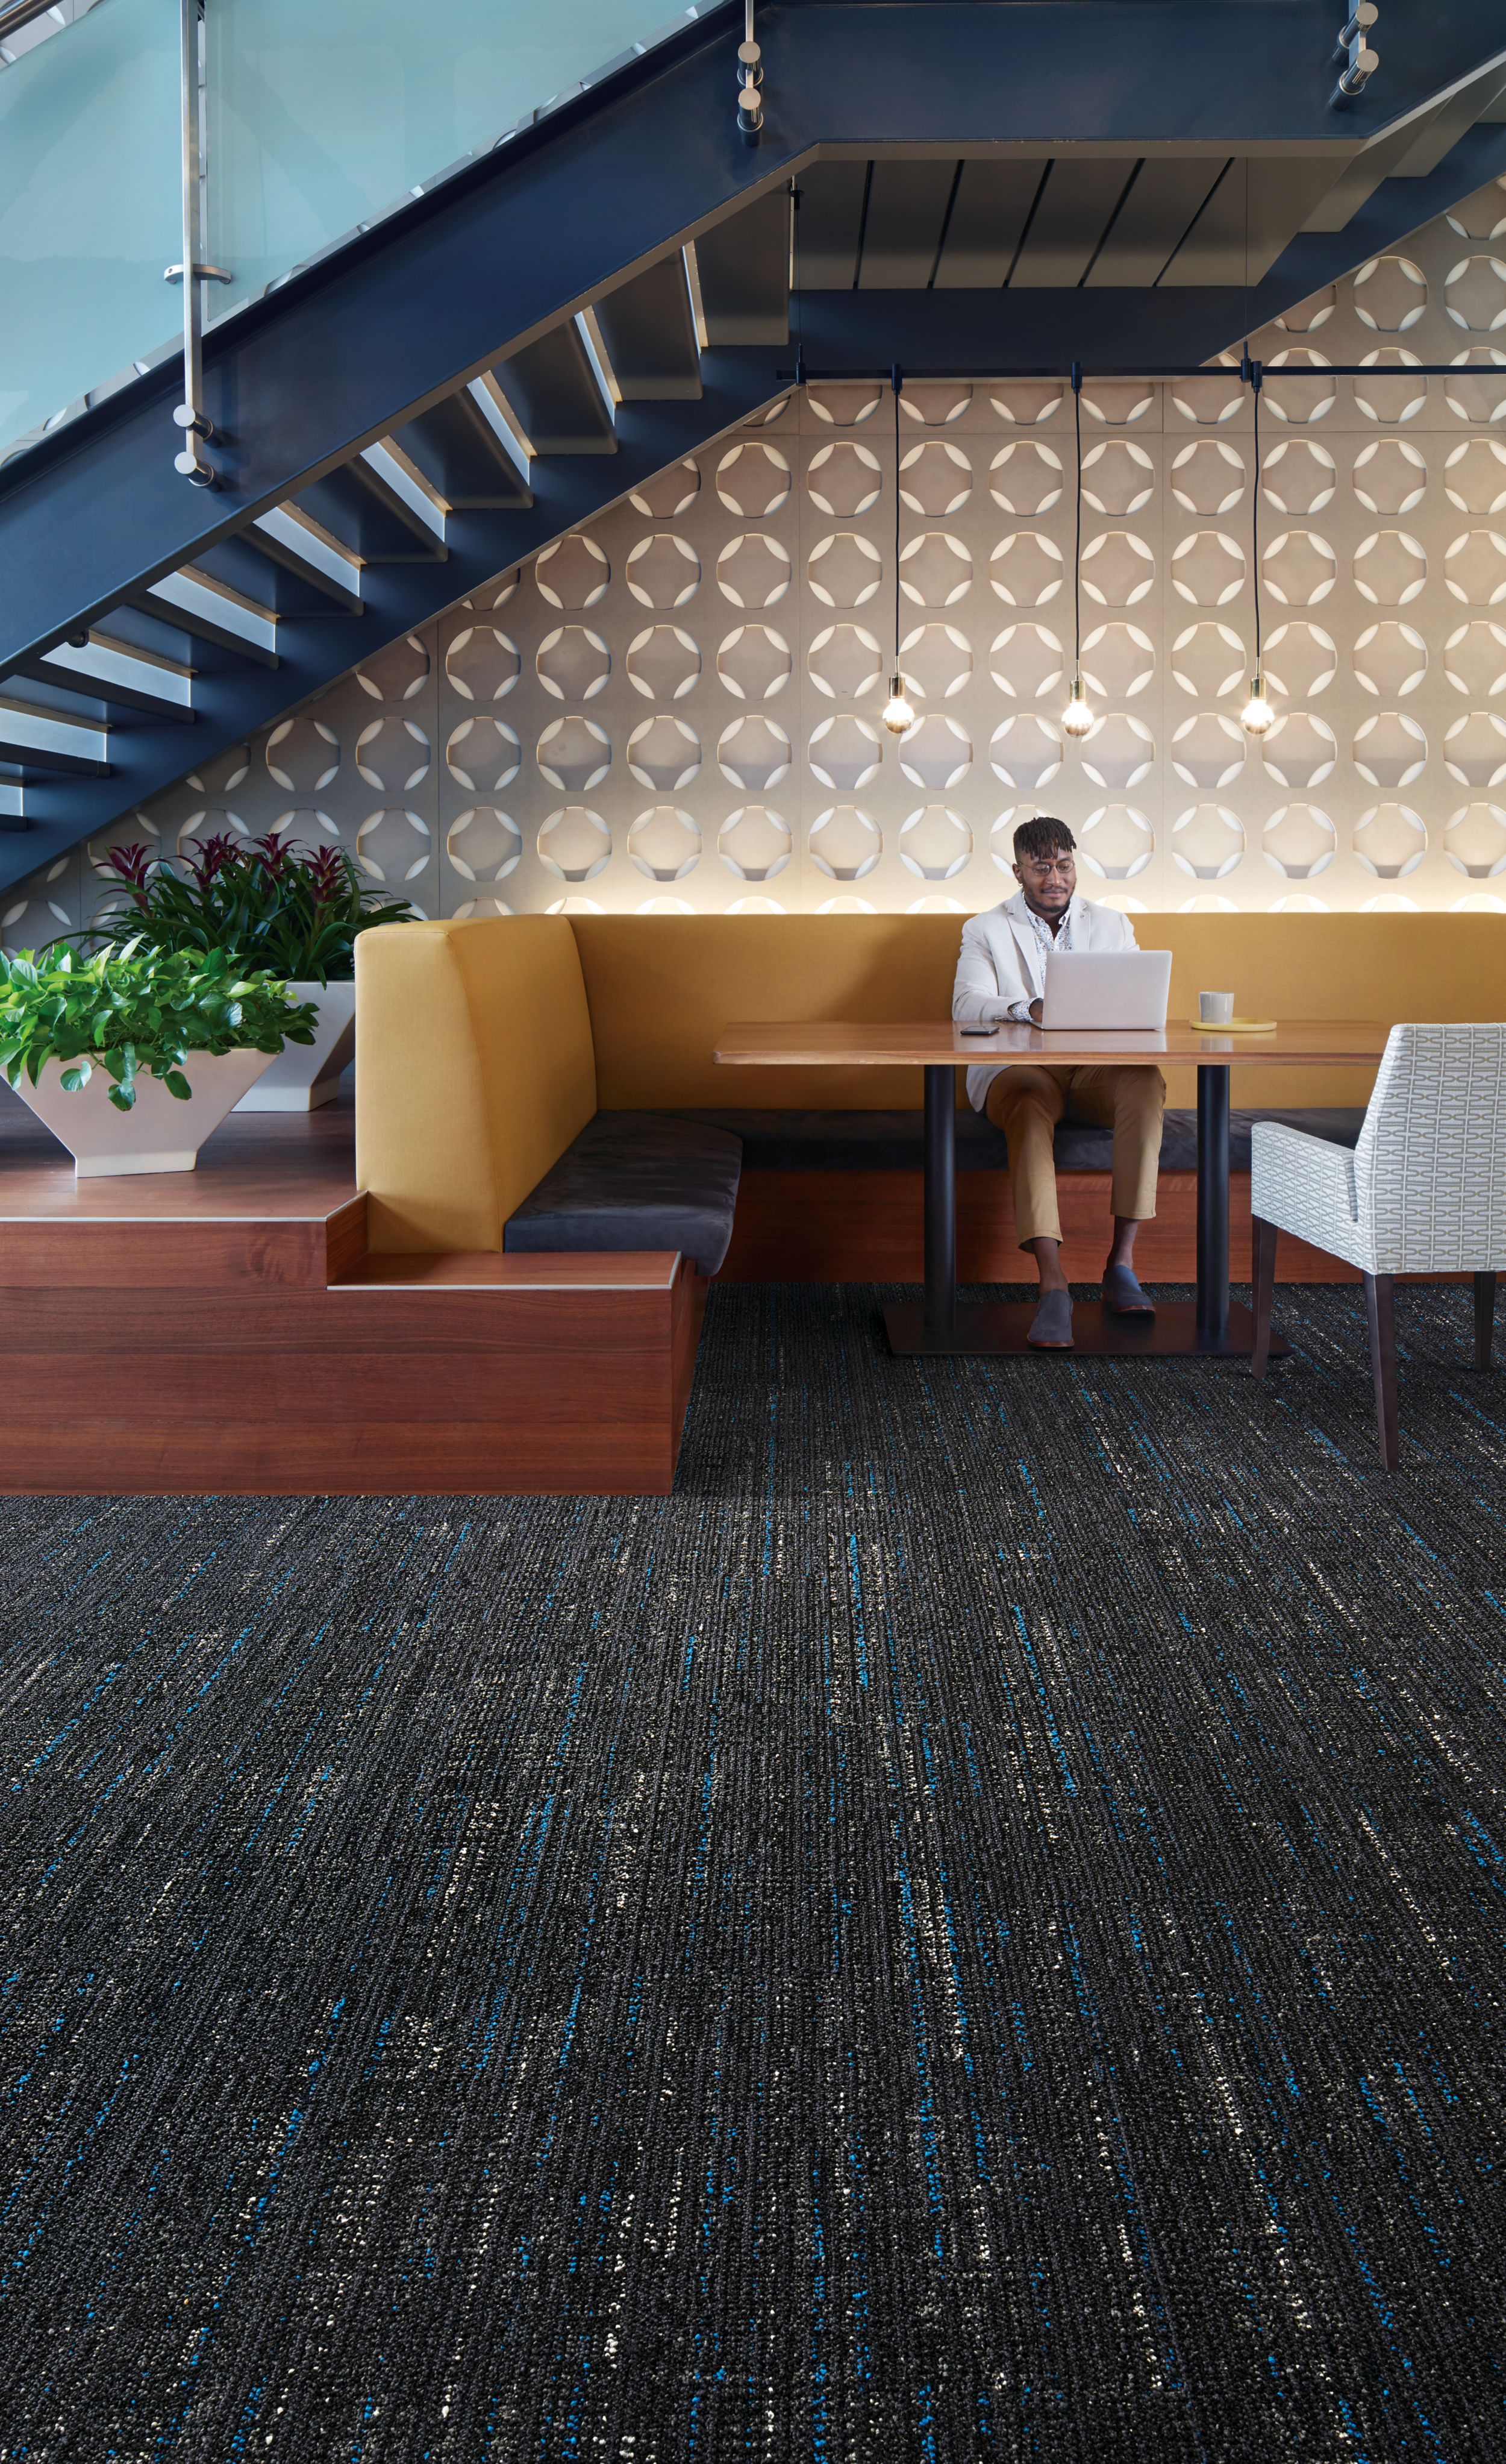 Interface Bitrate plank carpet tile in seating area with stairwell image number 10